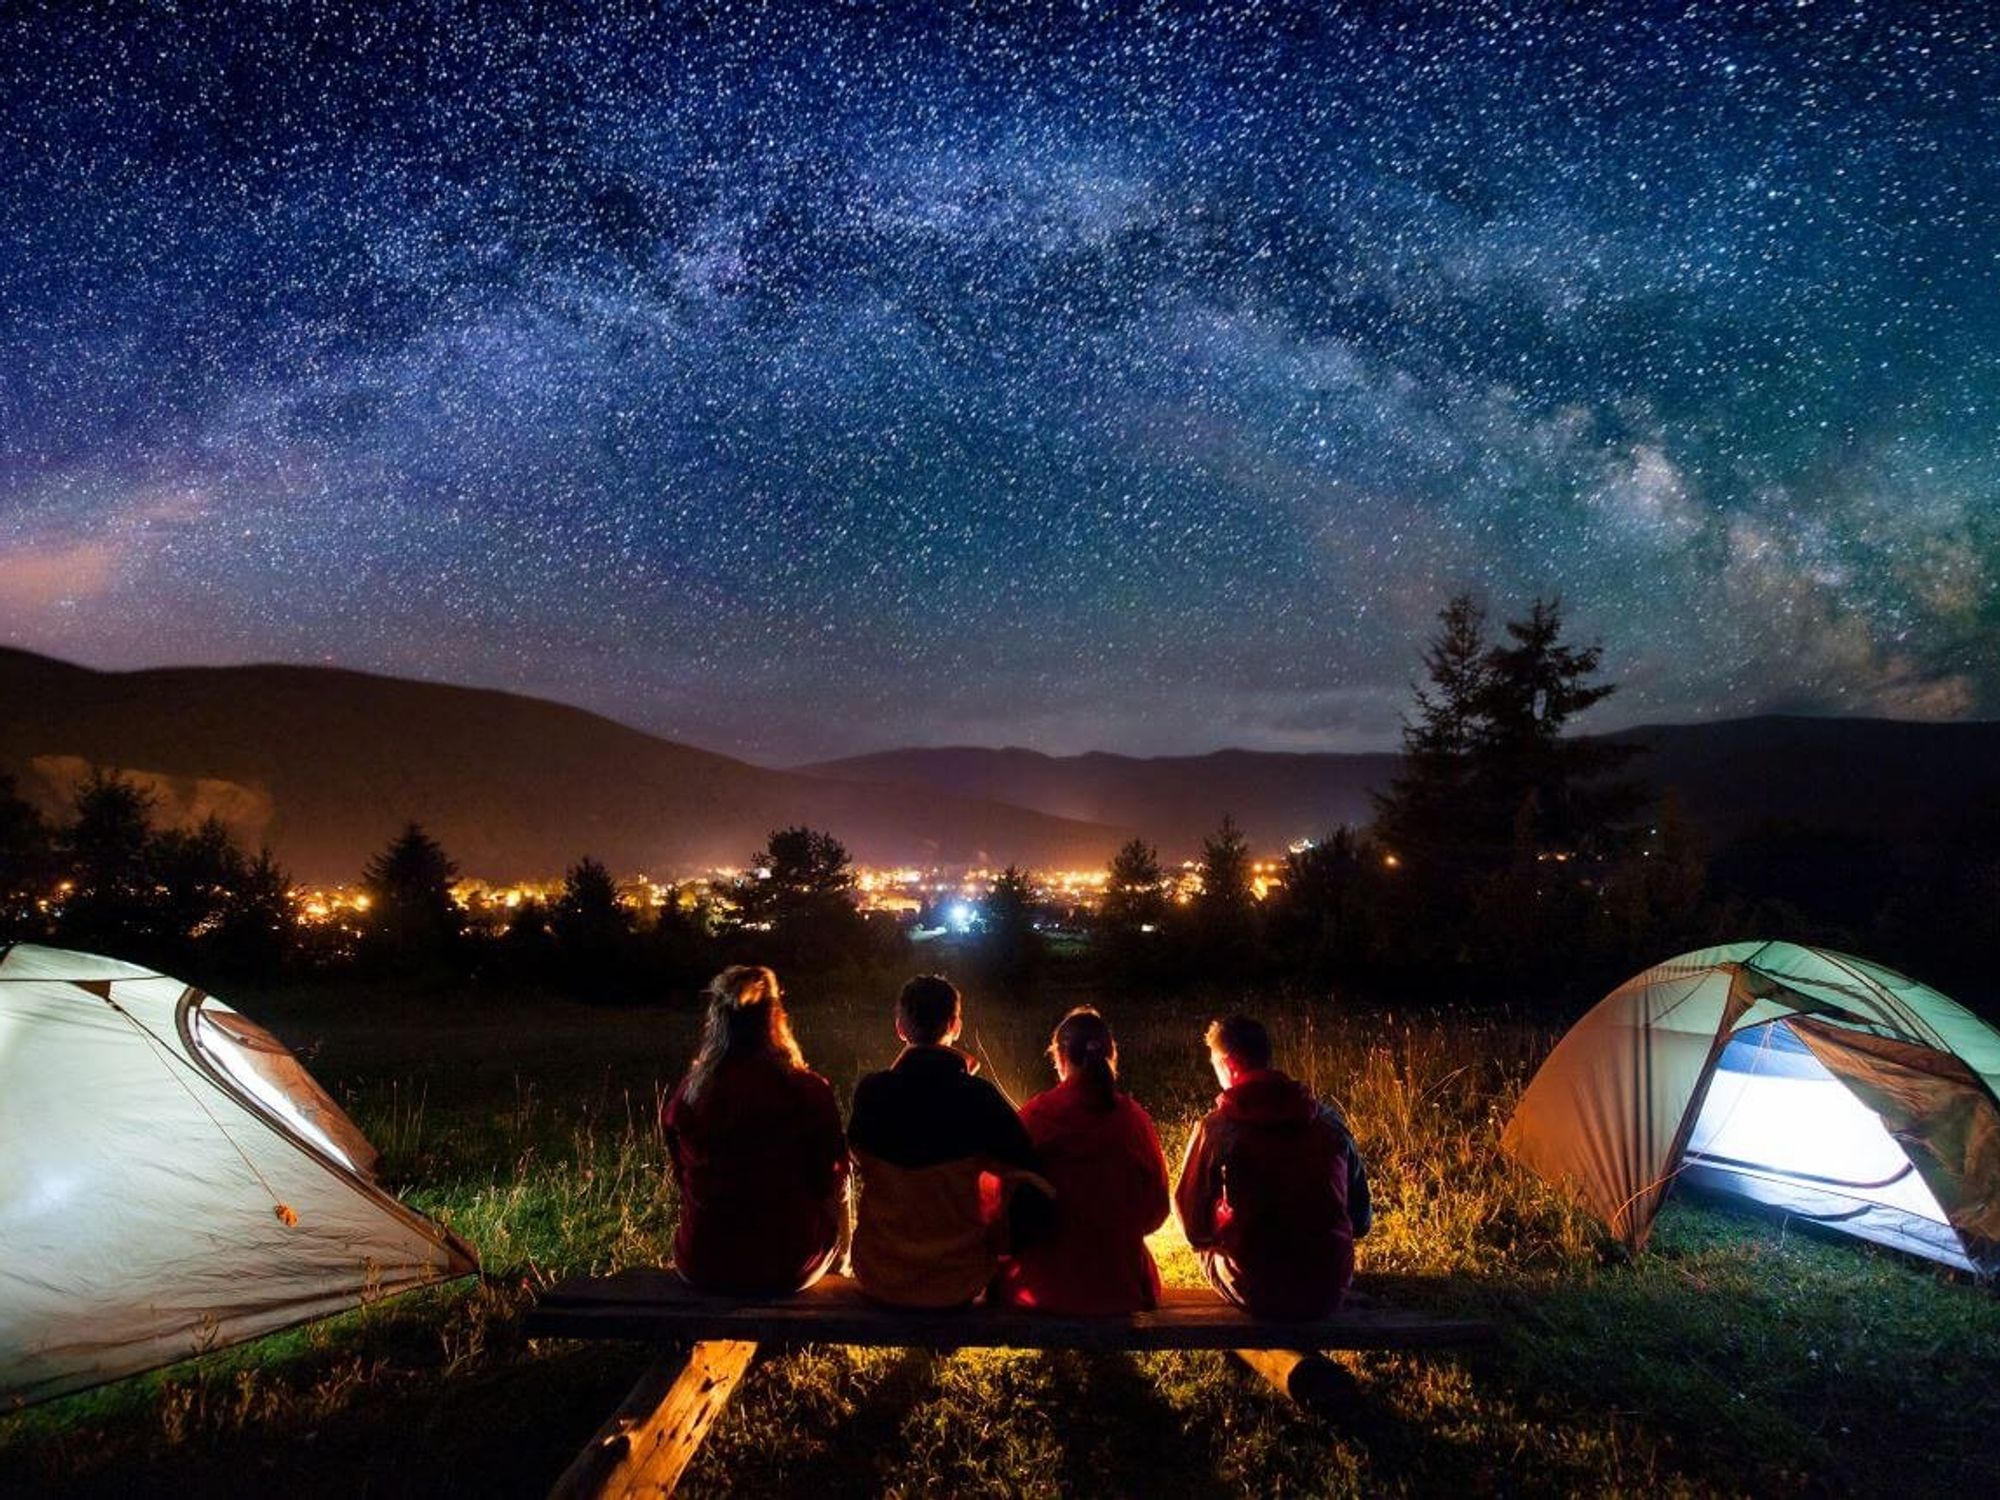 Camping under the sky